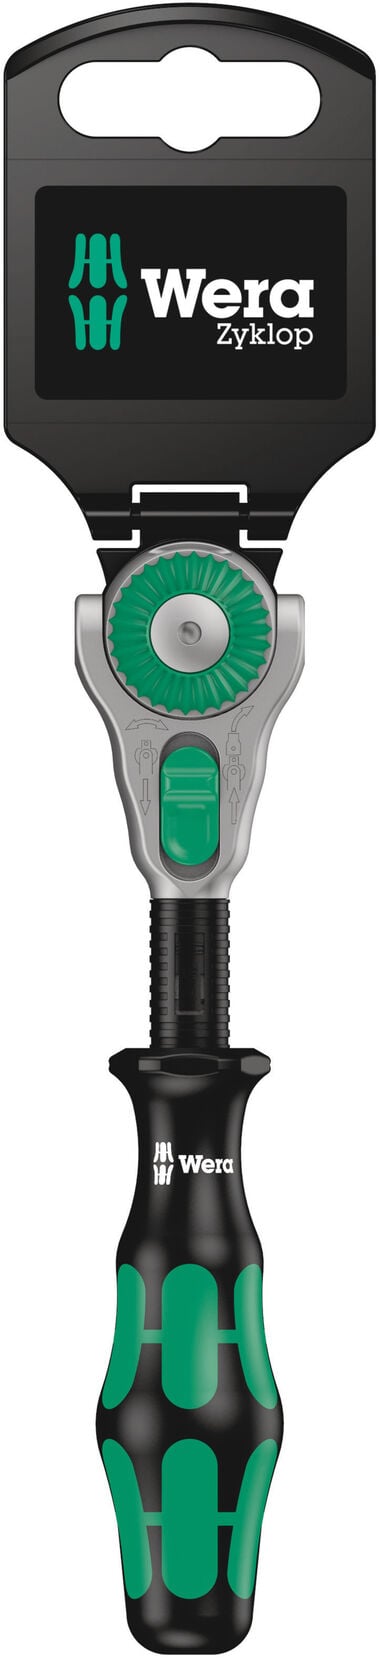 Wera Tools 8000 A SB Zyklop Speed Ratchet with 1/4" Drive